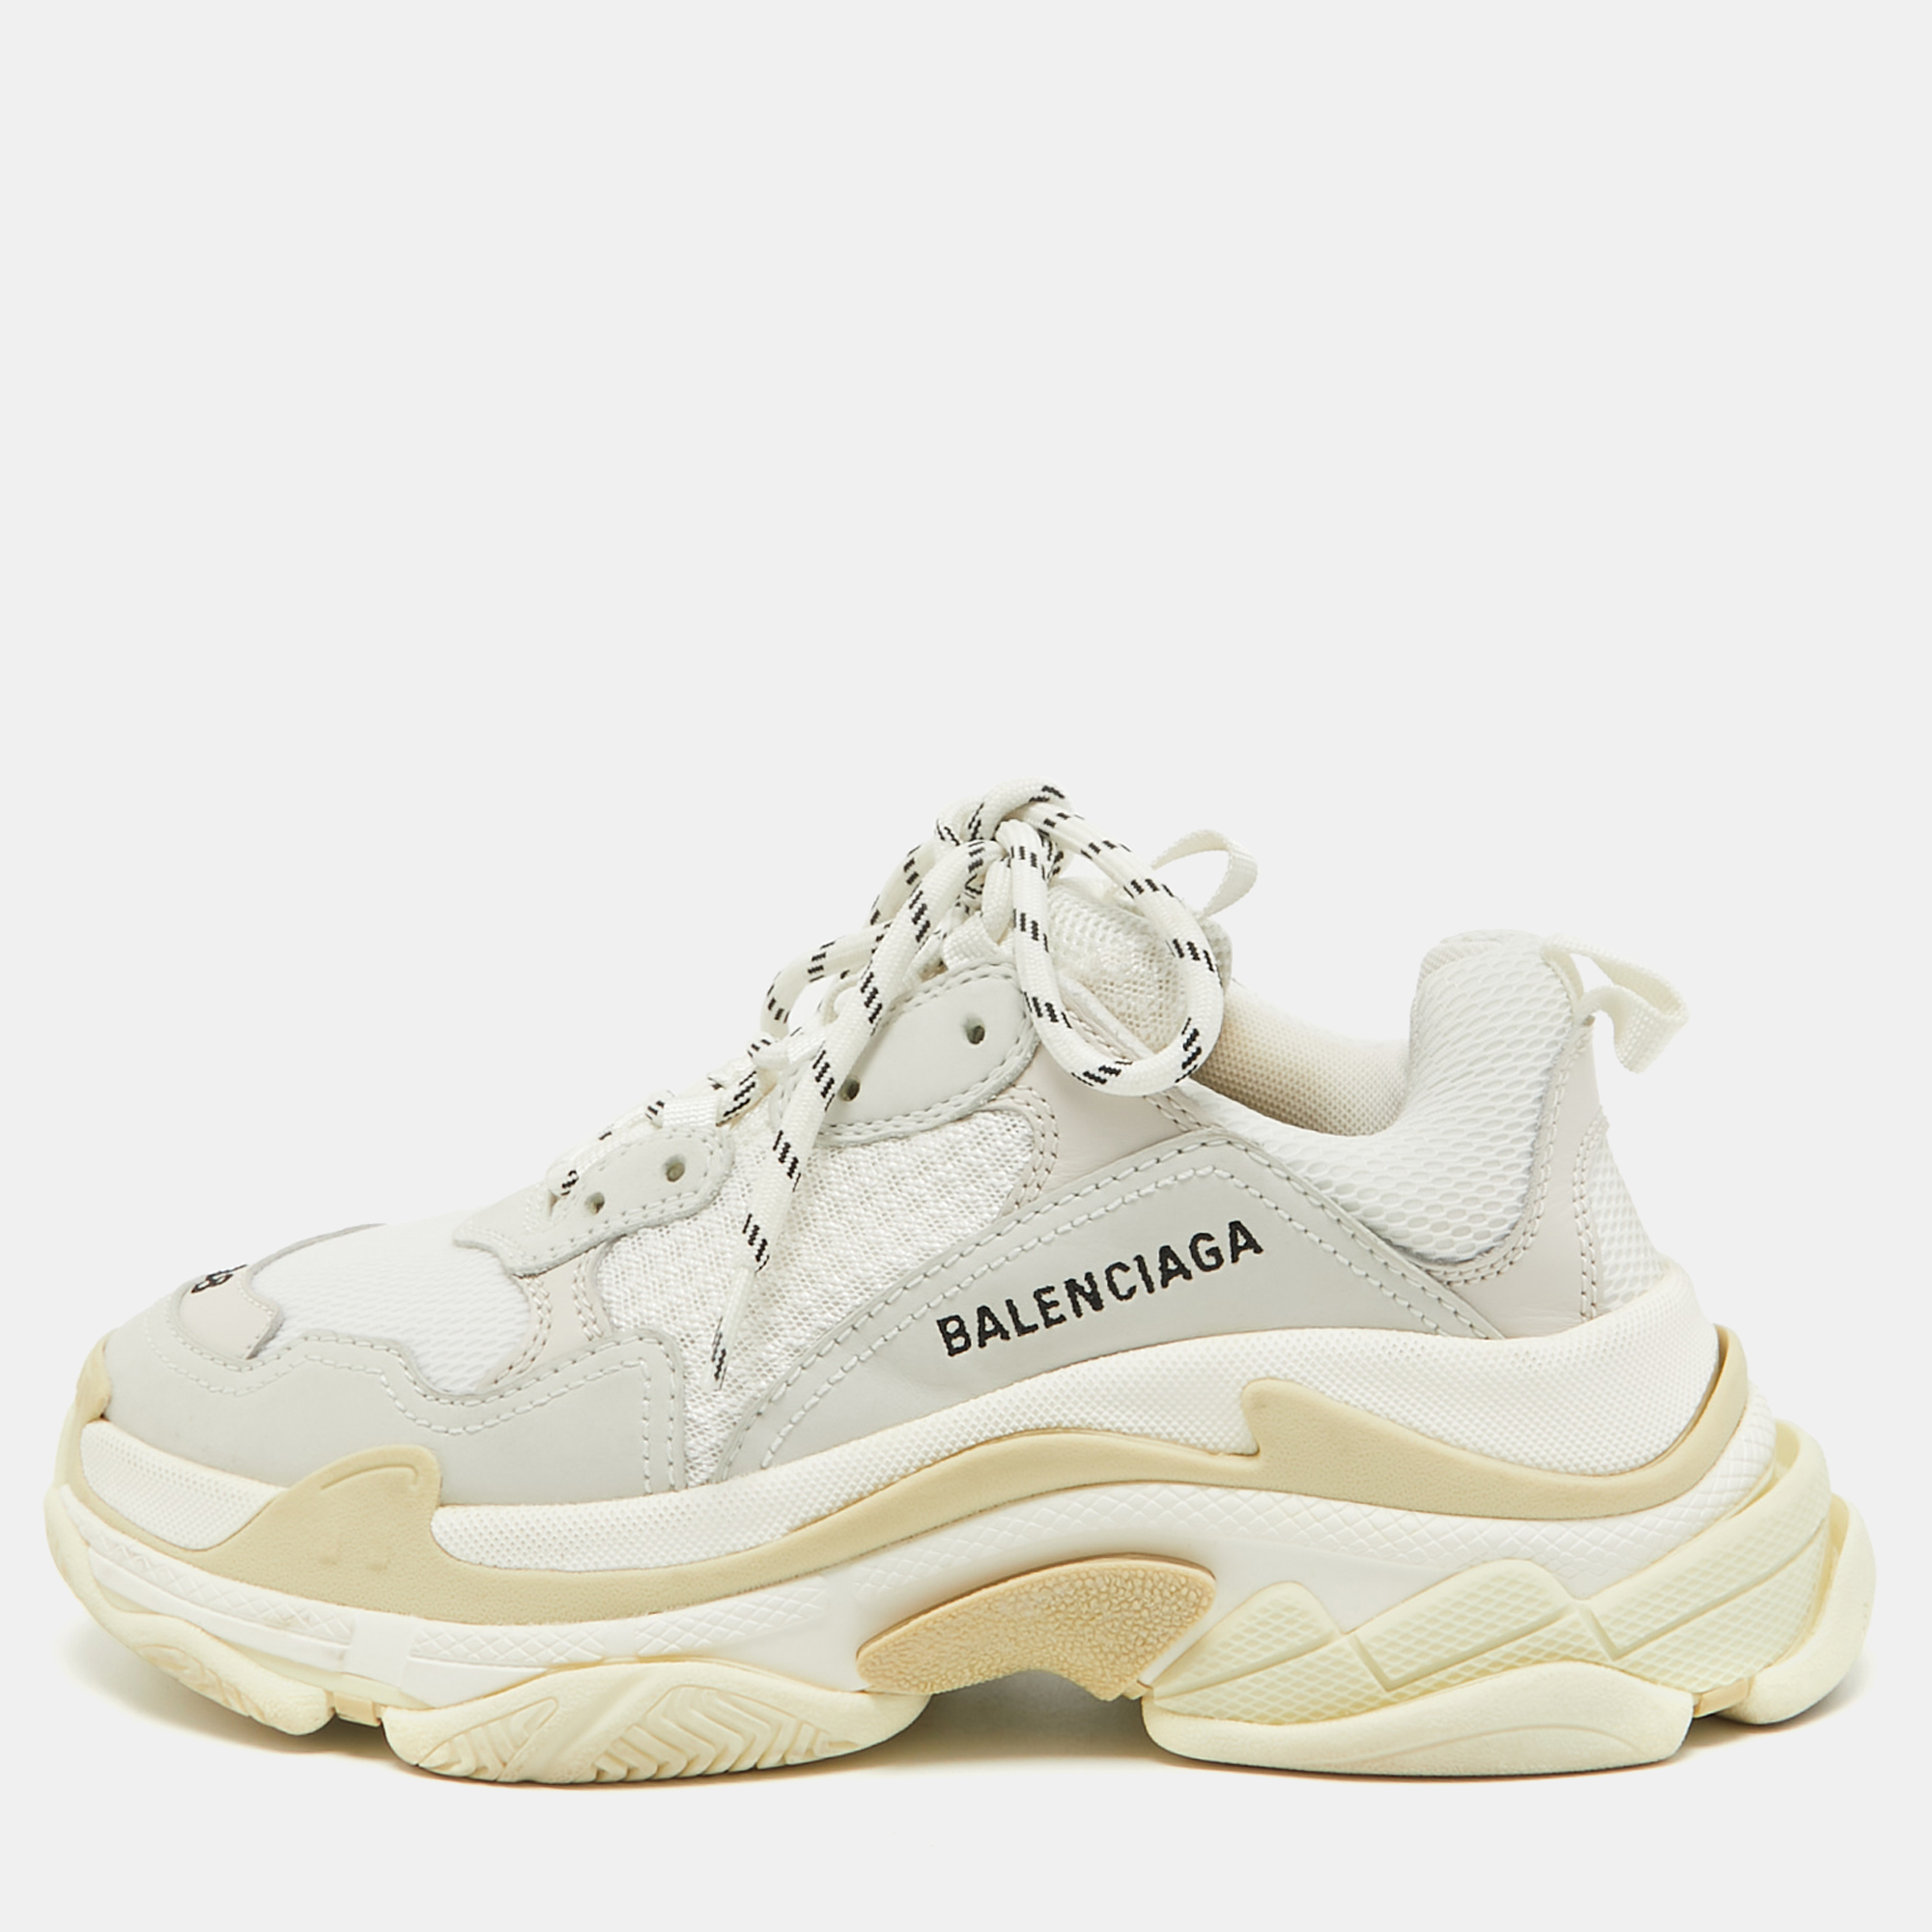 Balenciaga White/Grey Leather And Mesh Triple S Sneakers Size 38